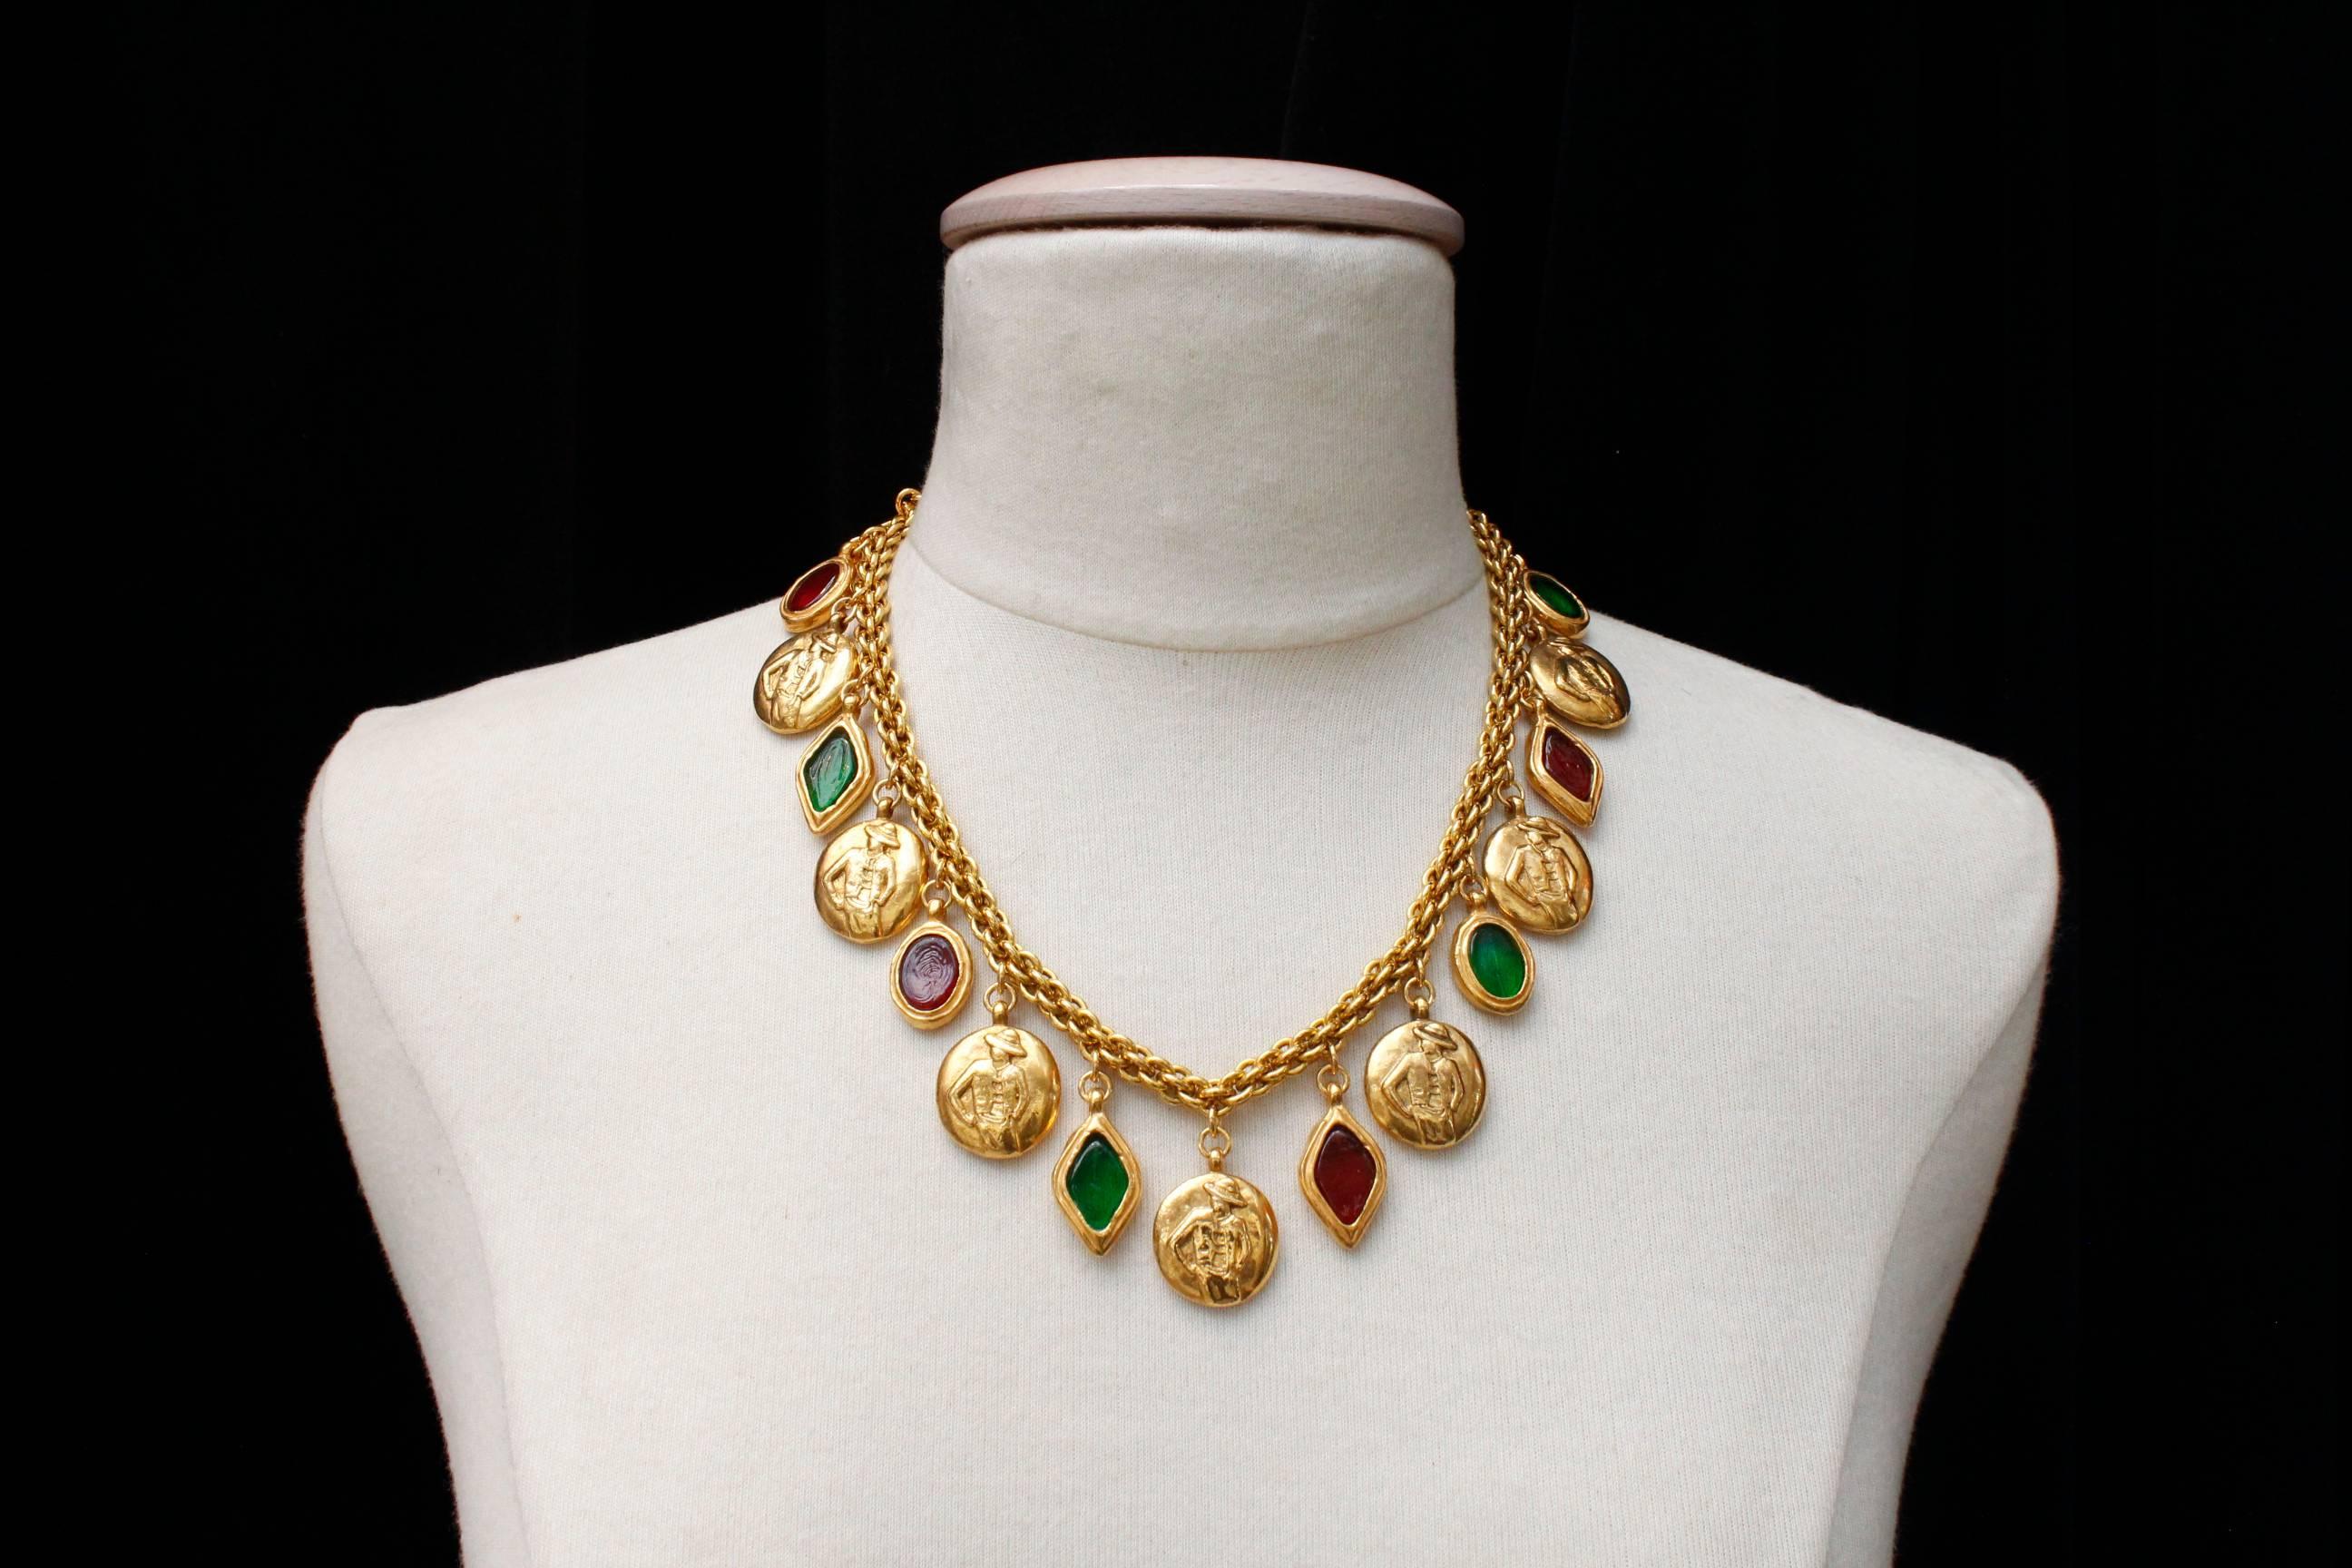 CHANEL (Made in France) Short necklace composed of  a textured gilded metal chain from which hang a series of triangular pendants paved with emerald cabochons, oval pendants paved with ruby cabochons and round medals showing the effigy of Gabrielle